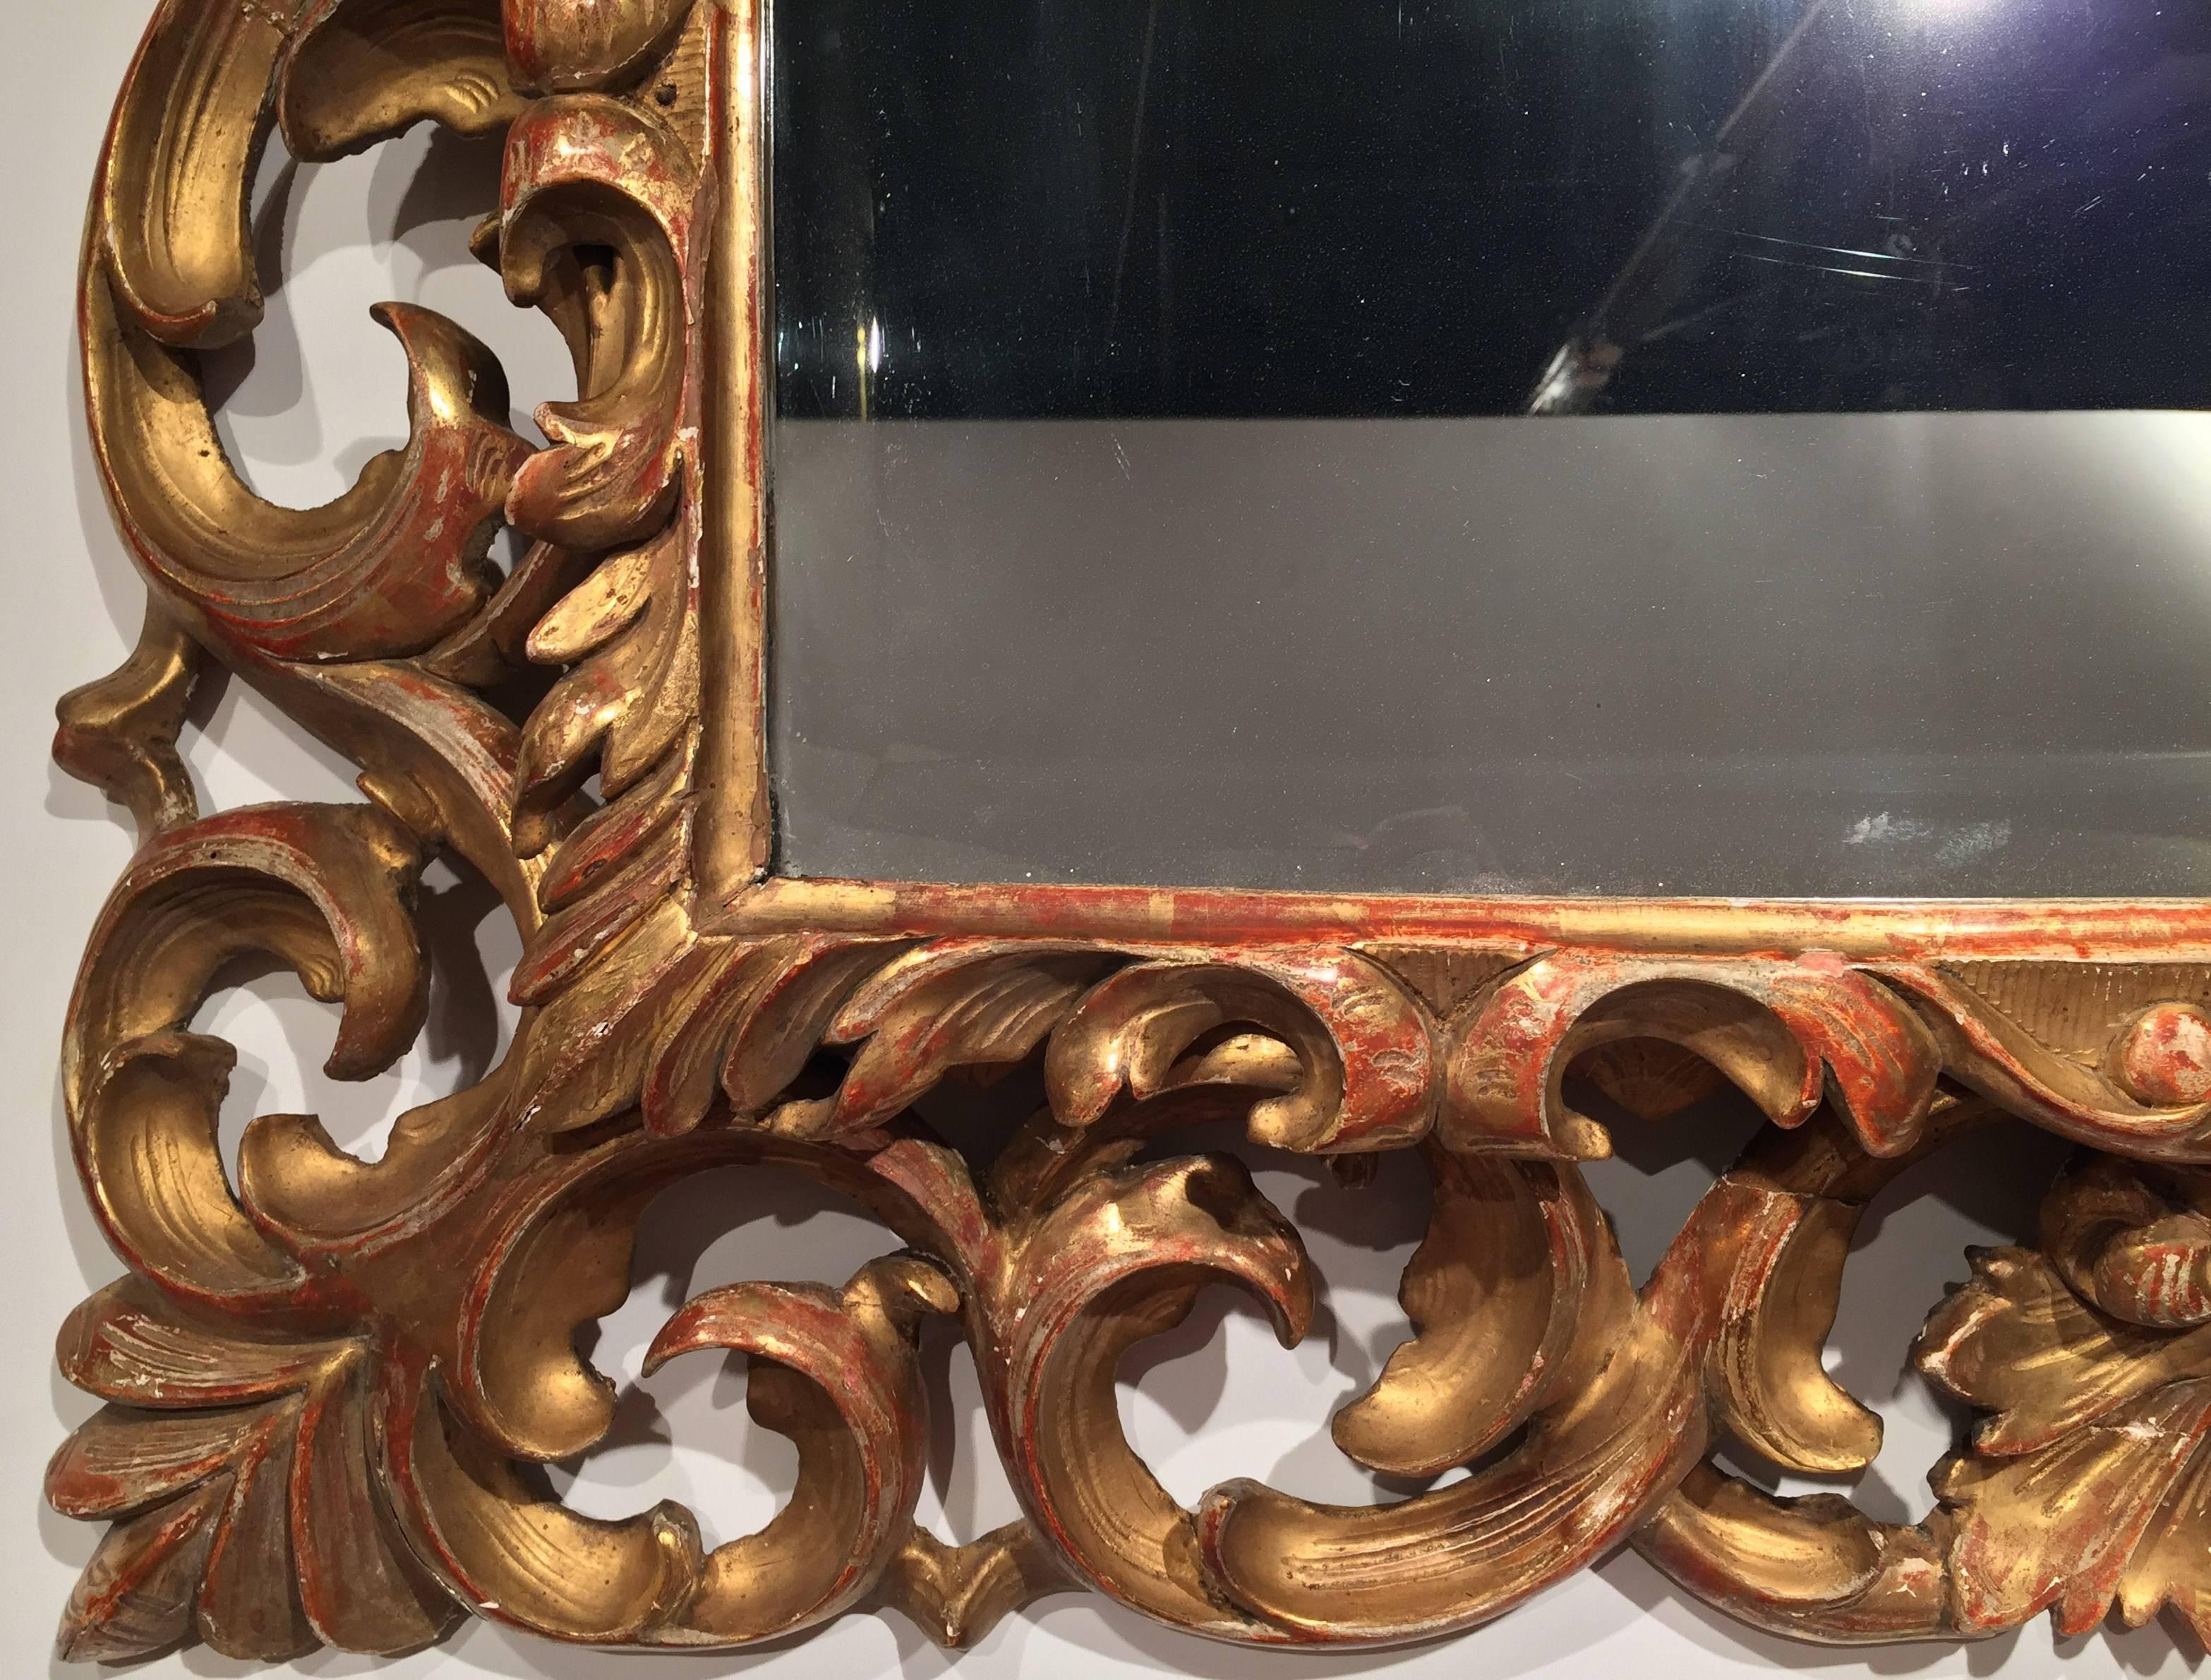 Beveled 19th Century French Napoleon III Carved Giltwood Mirror with Scroll & Leaf Decor